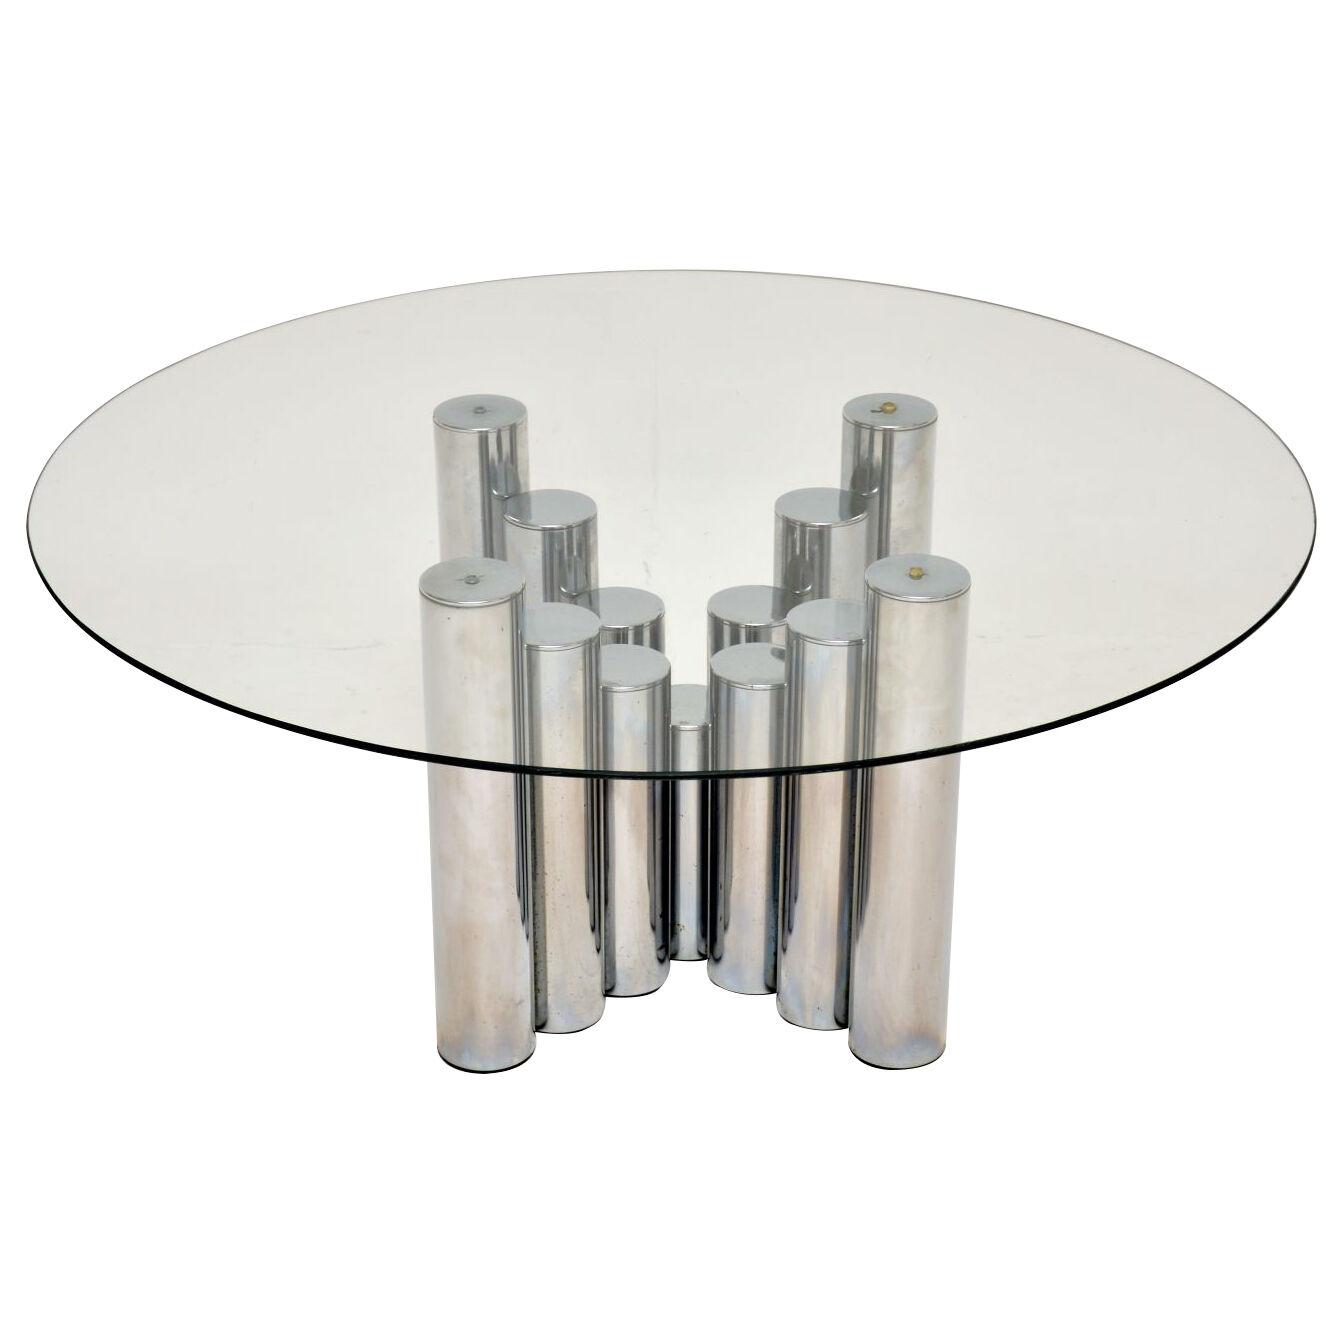 1970's Vintage Chrome & Glass Coffee Table by Pieff